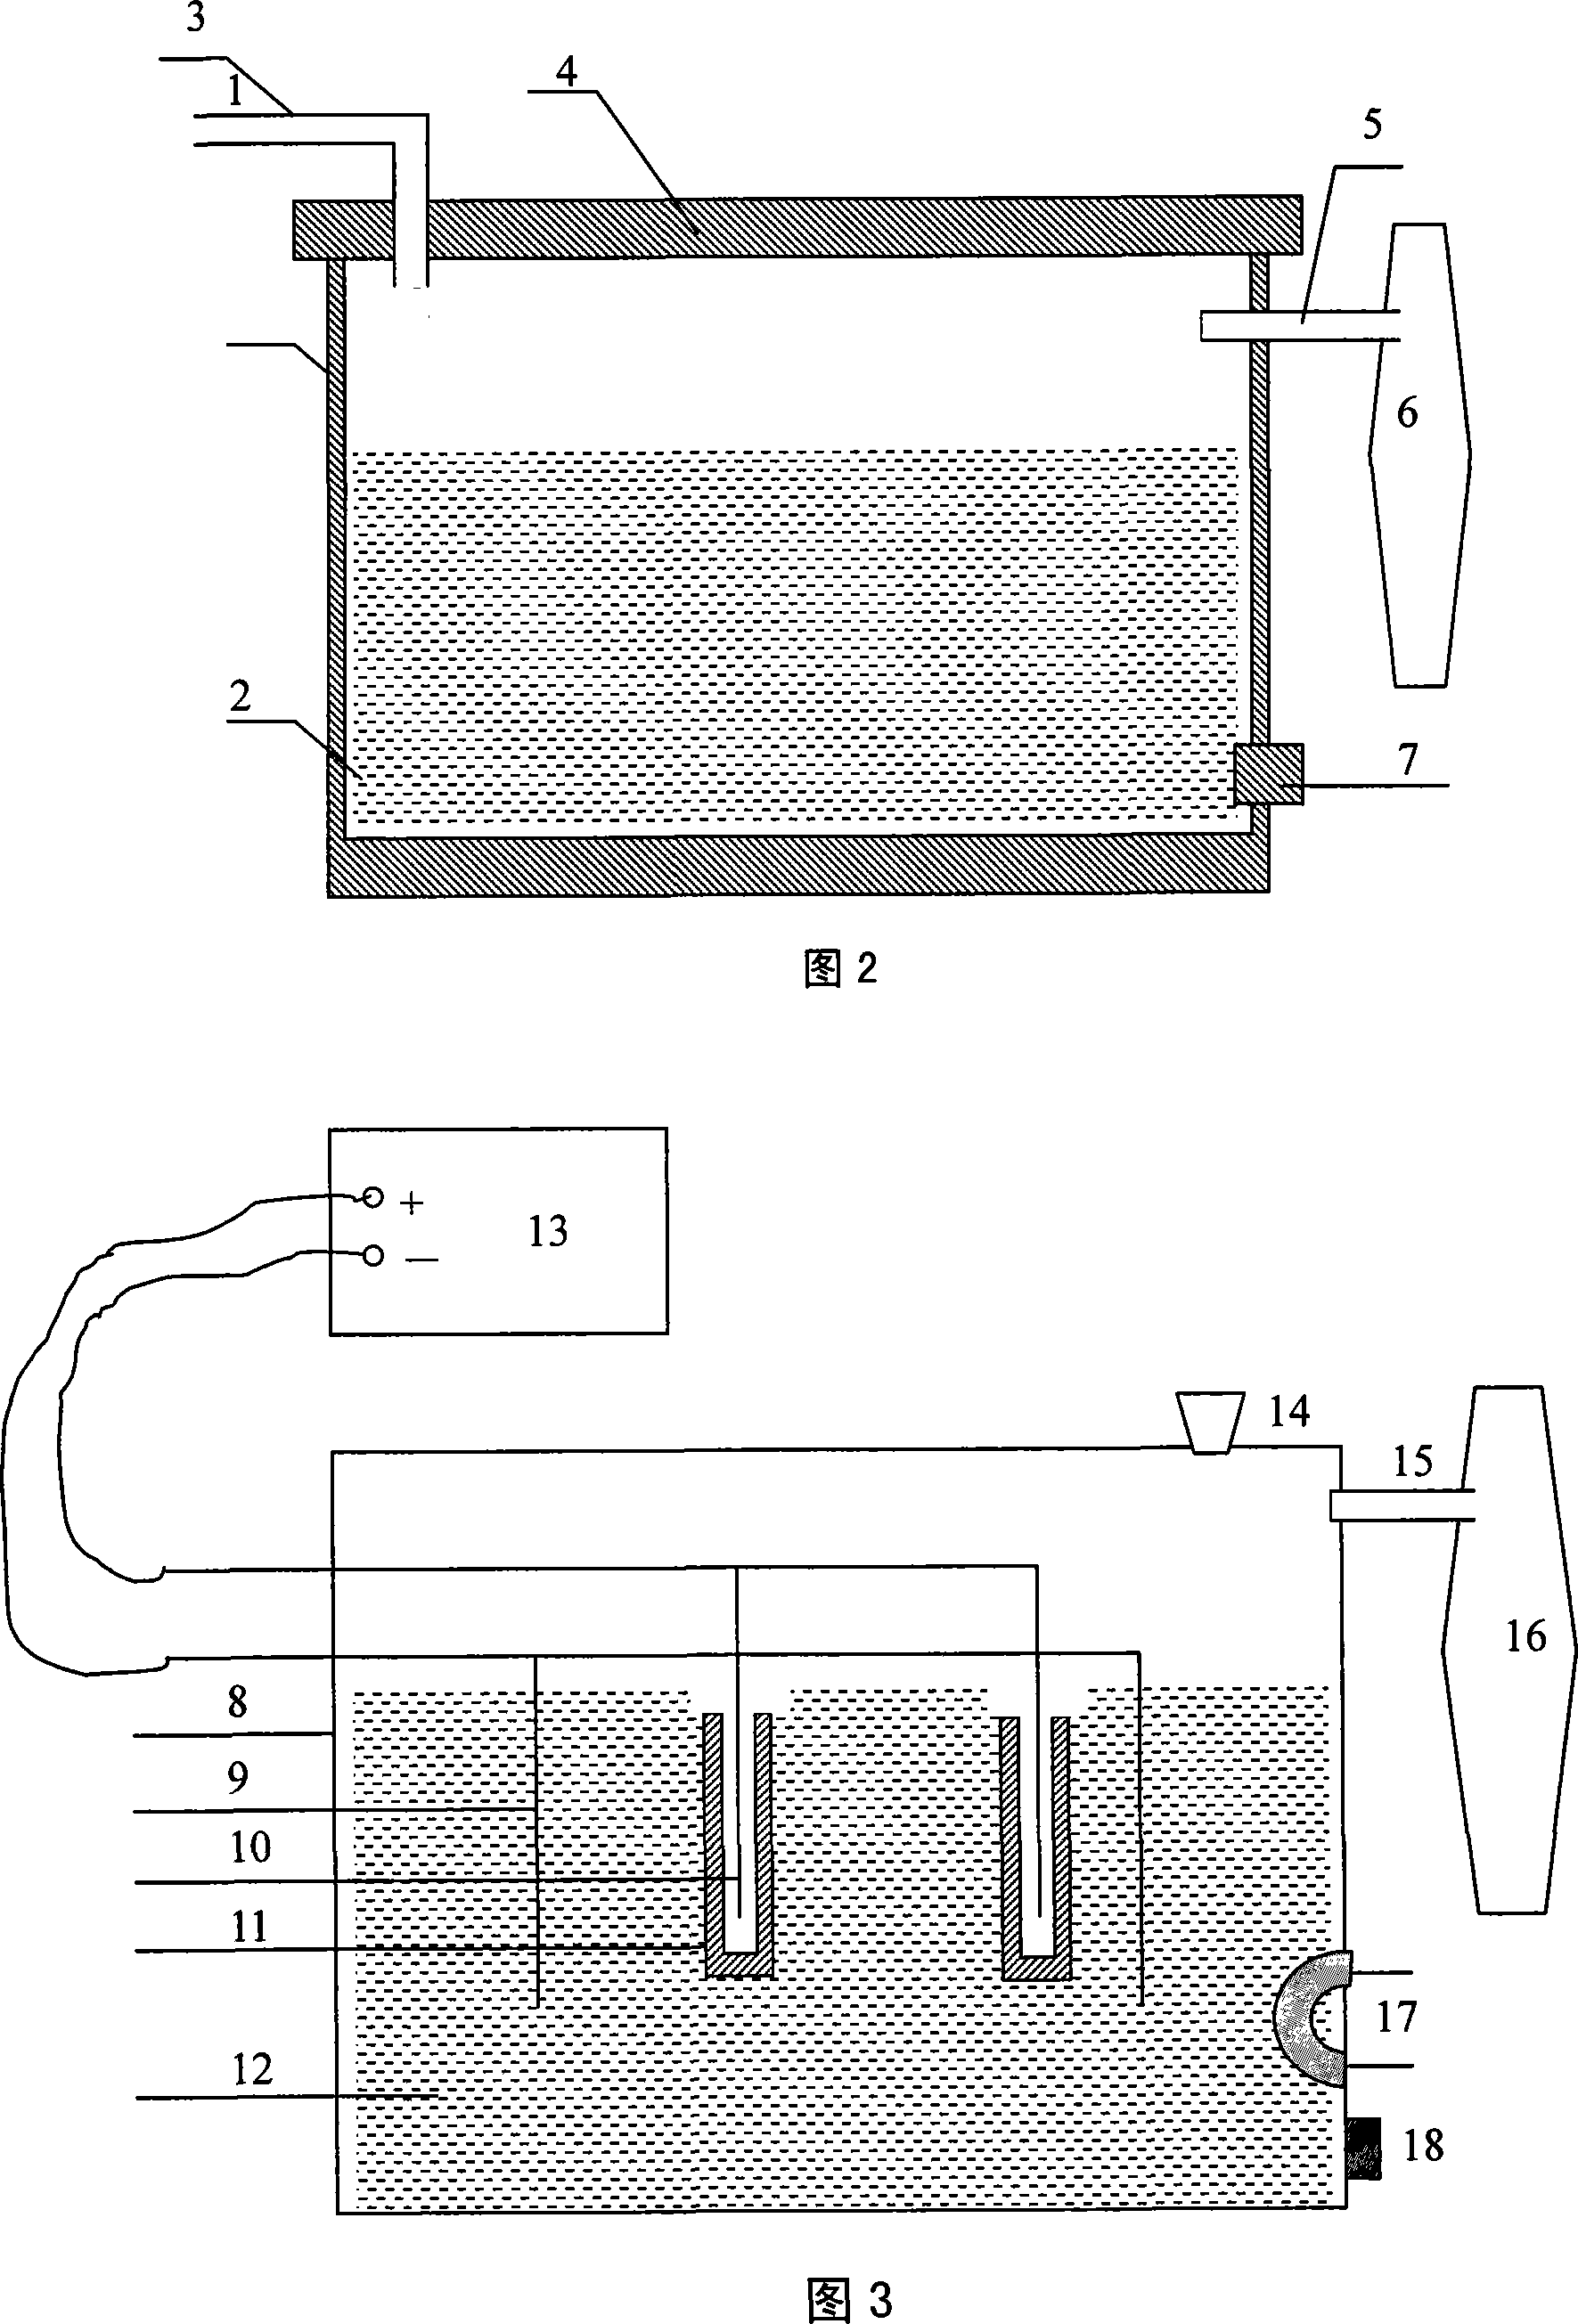 Method for reclaiming metals by classified electrolysis of electron wastes